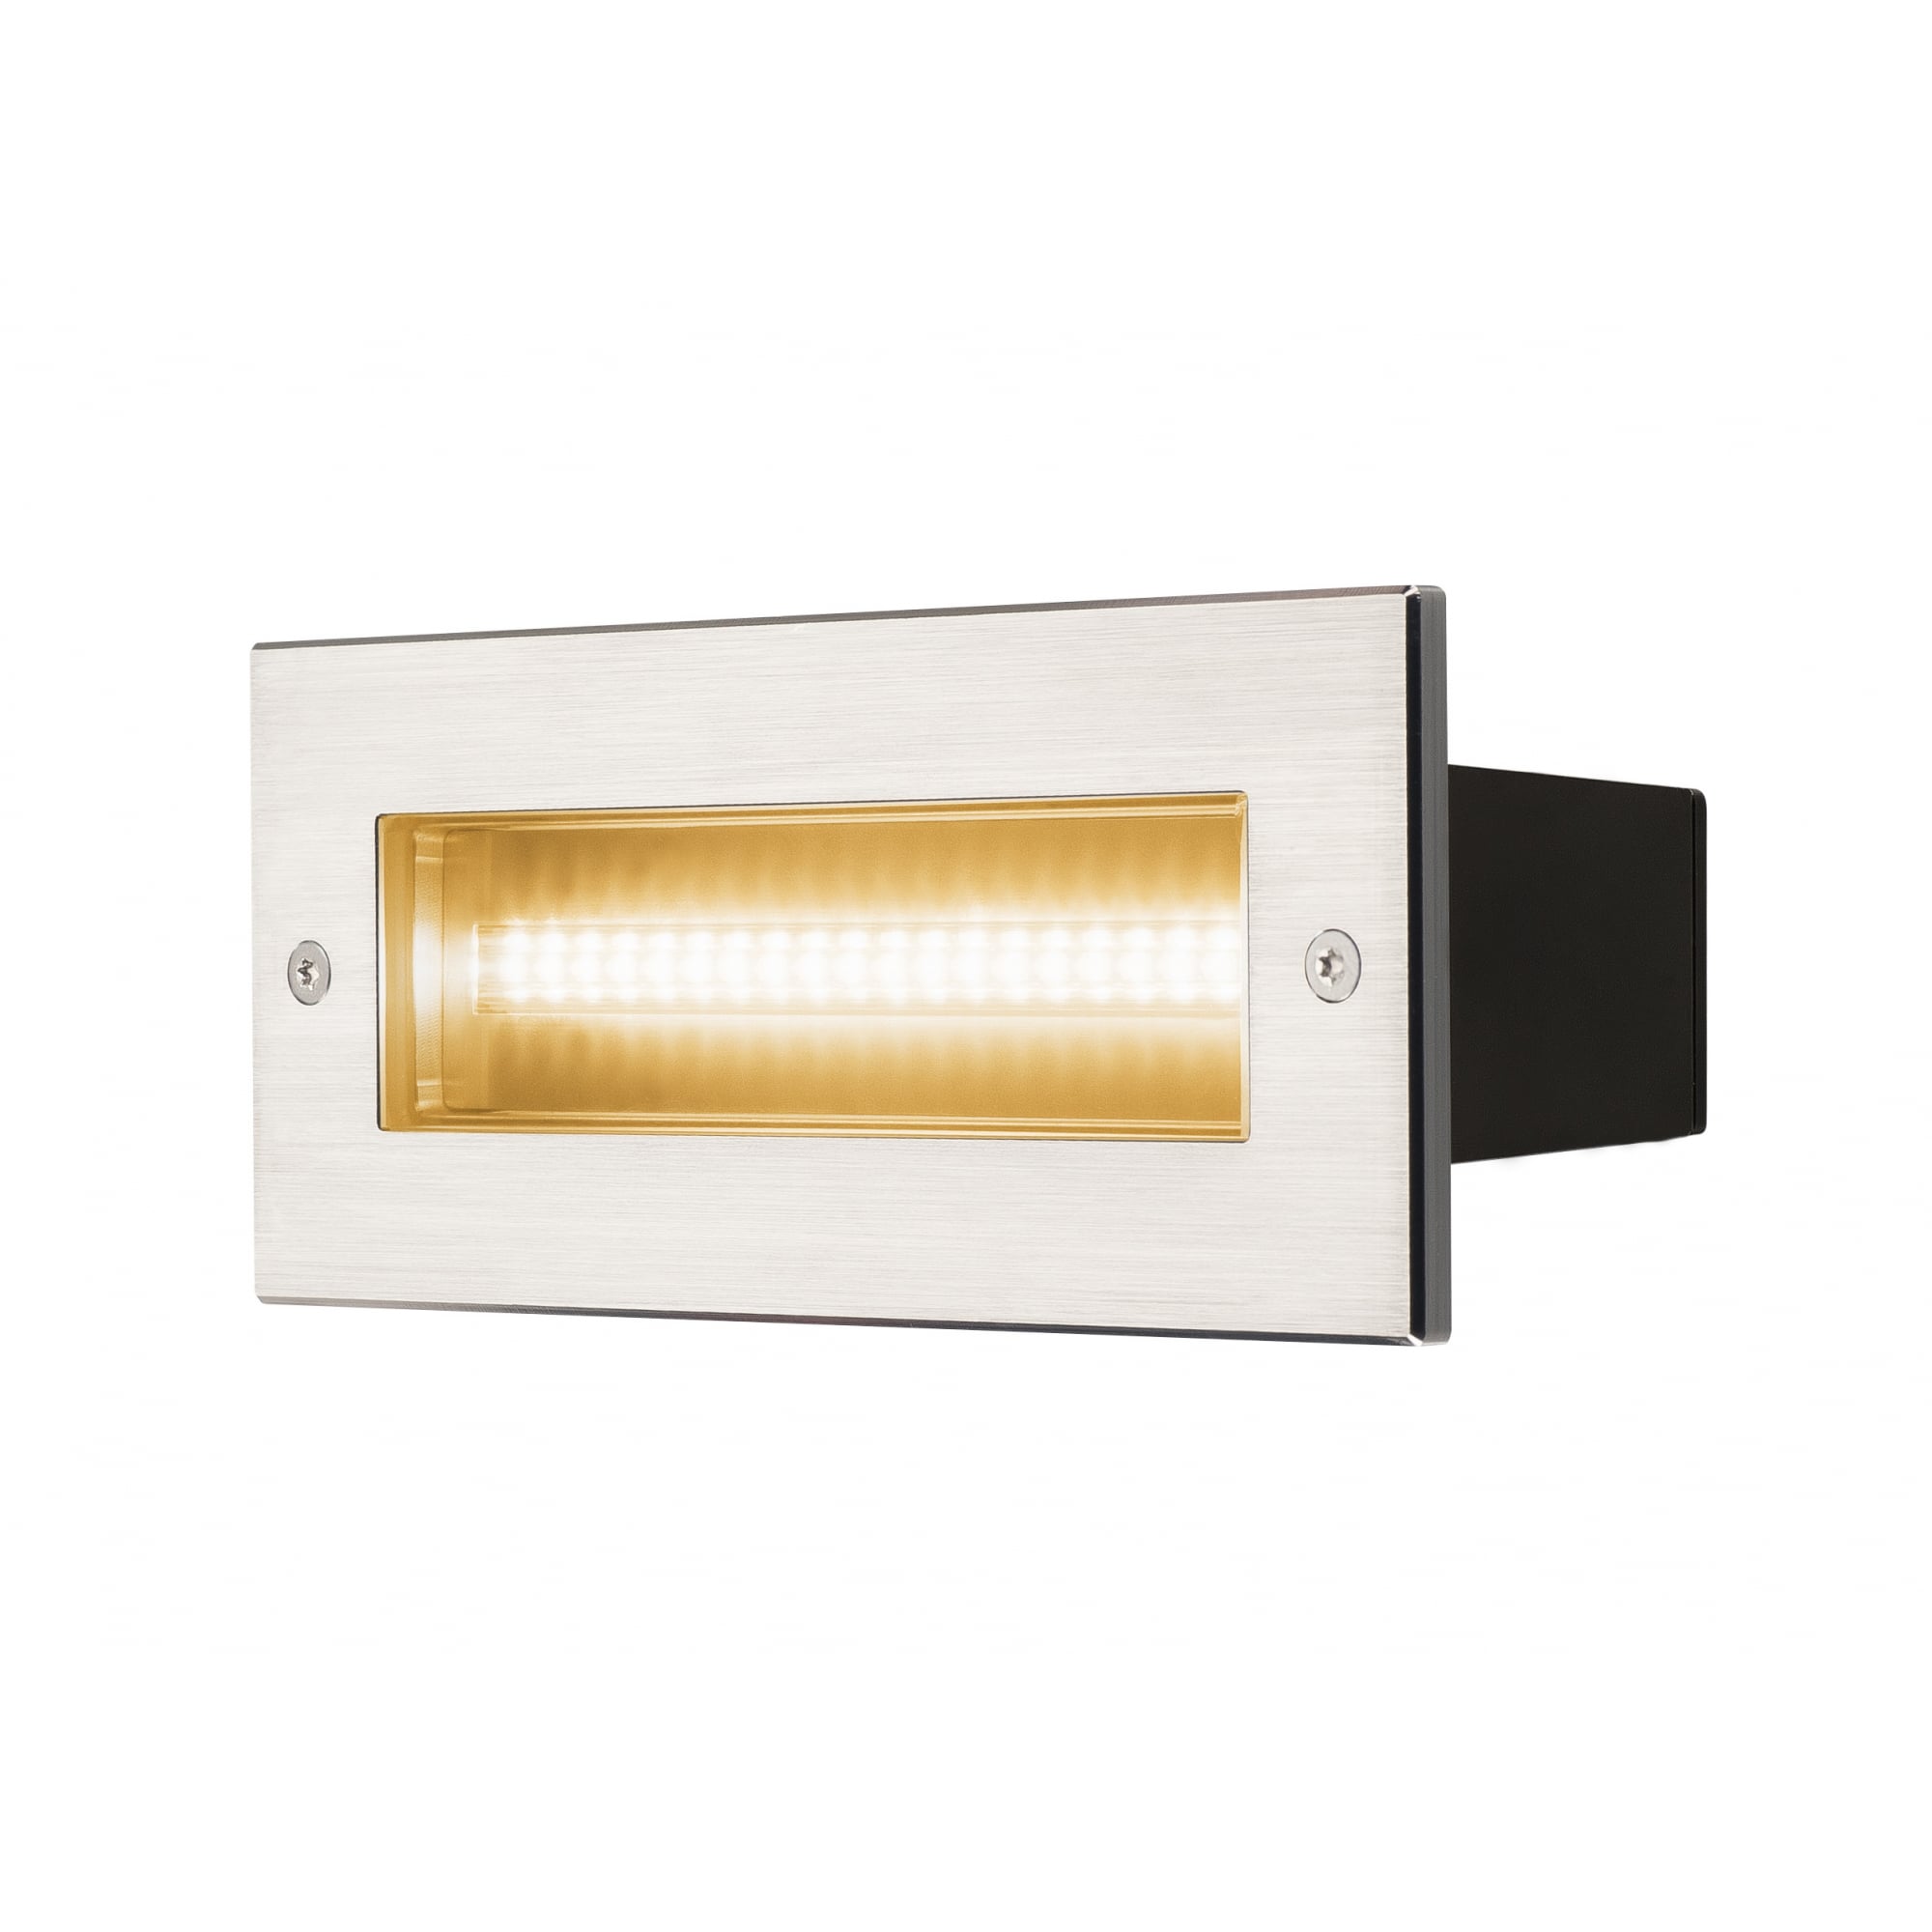 Brick, Outdoor Recessed Wall Light, LED, 3000K, Stainless Steel, IP67, 240V, 950Lm 10W